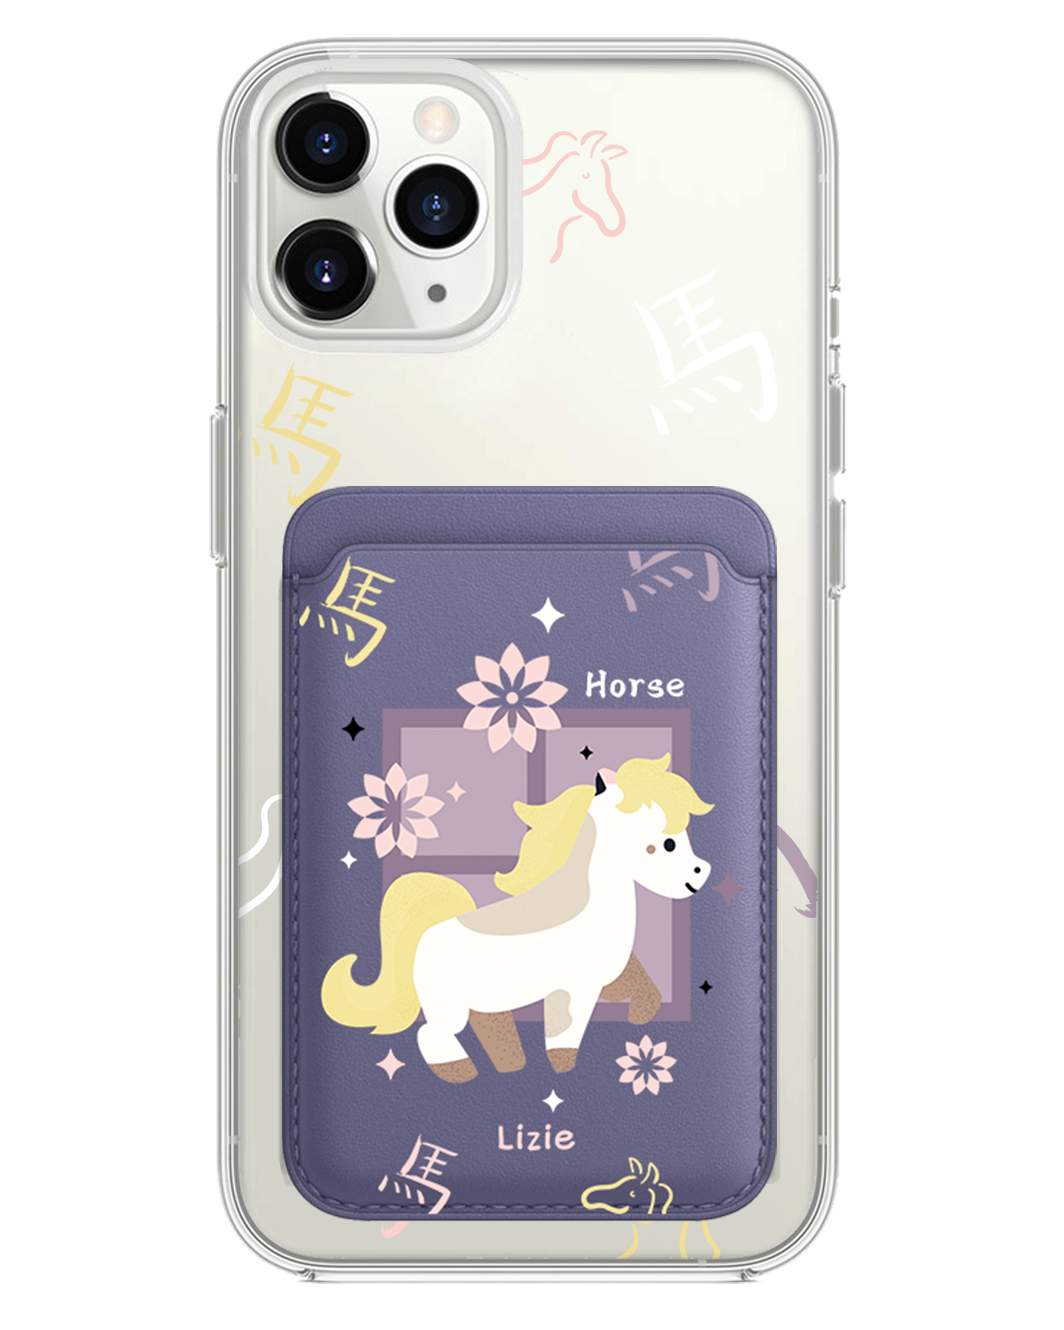 iPhone Magnetic Wallet Case - Horse (Chinese Zodiac / Shio)